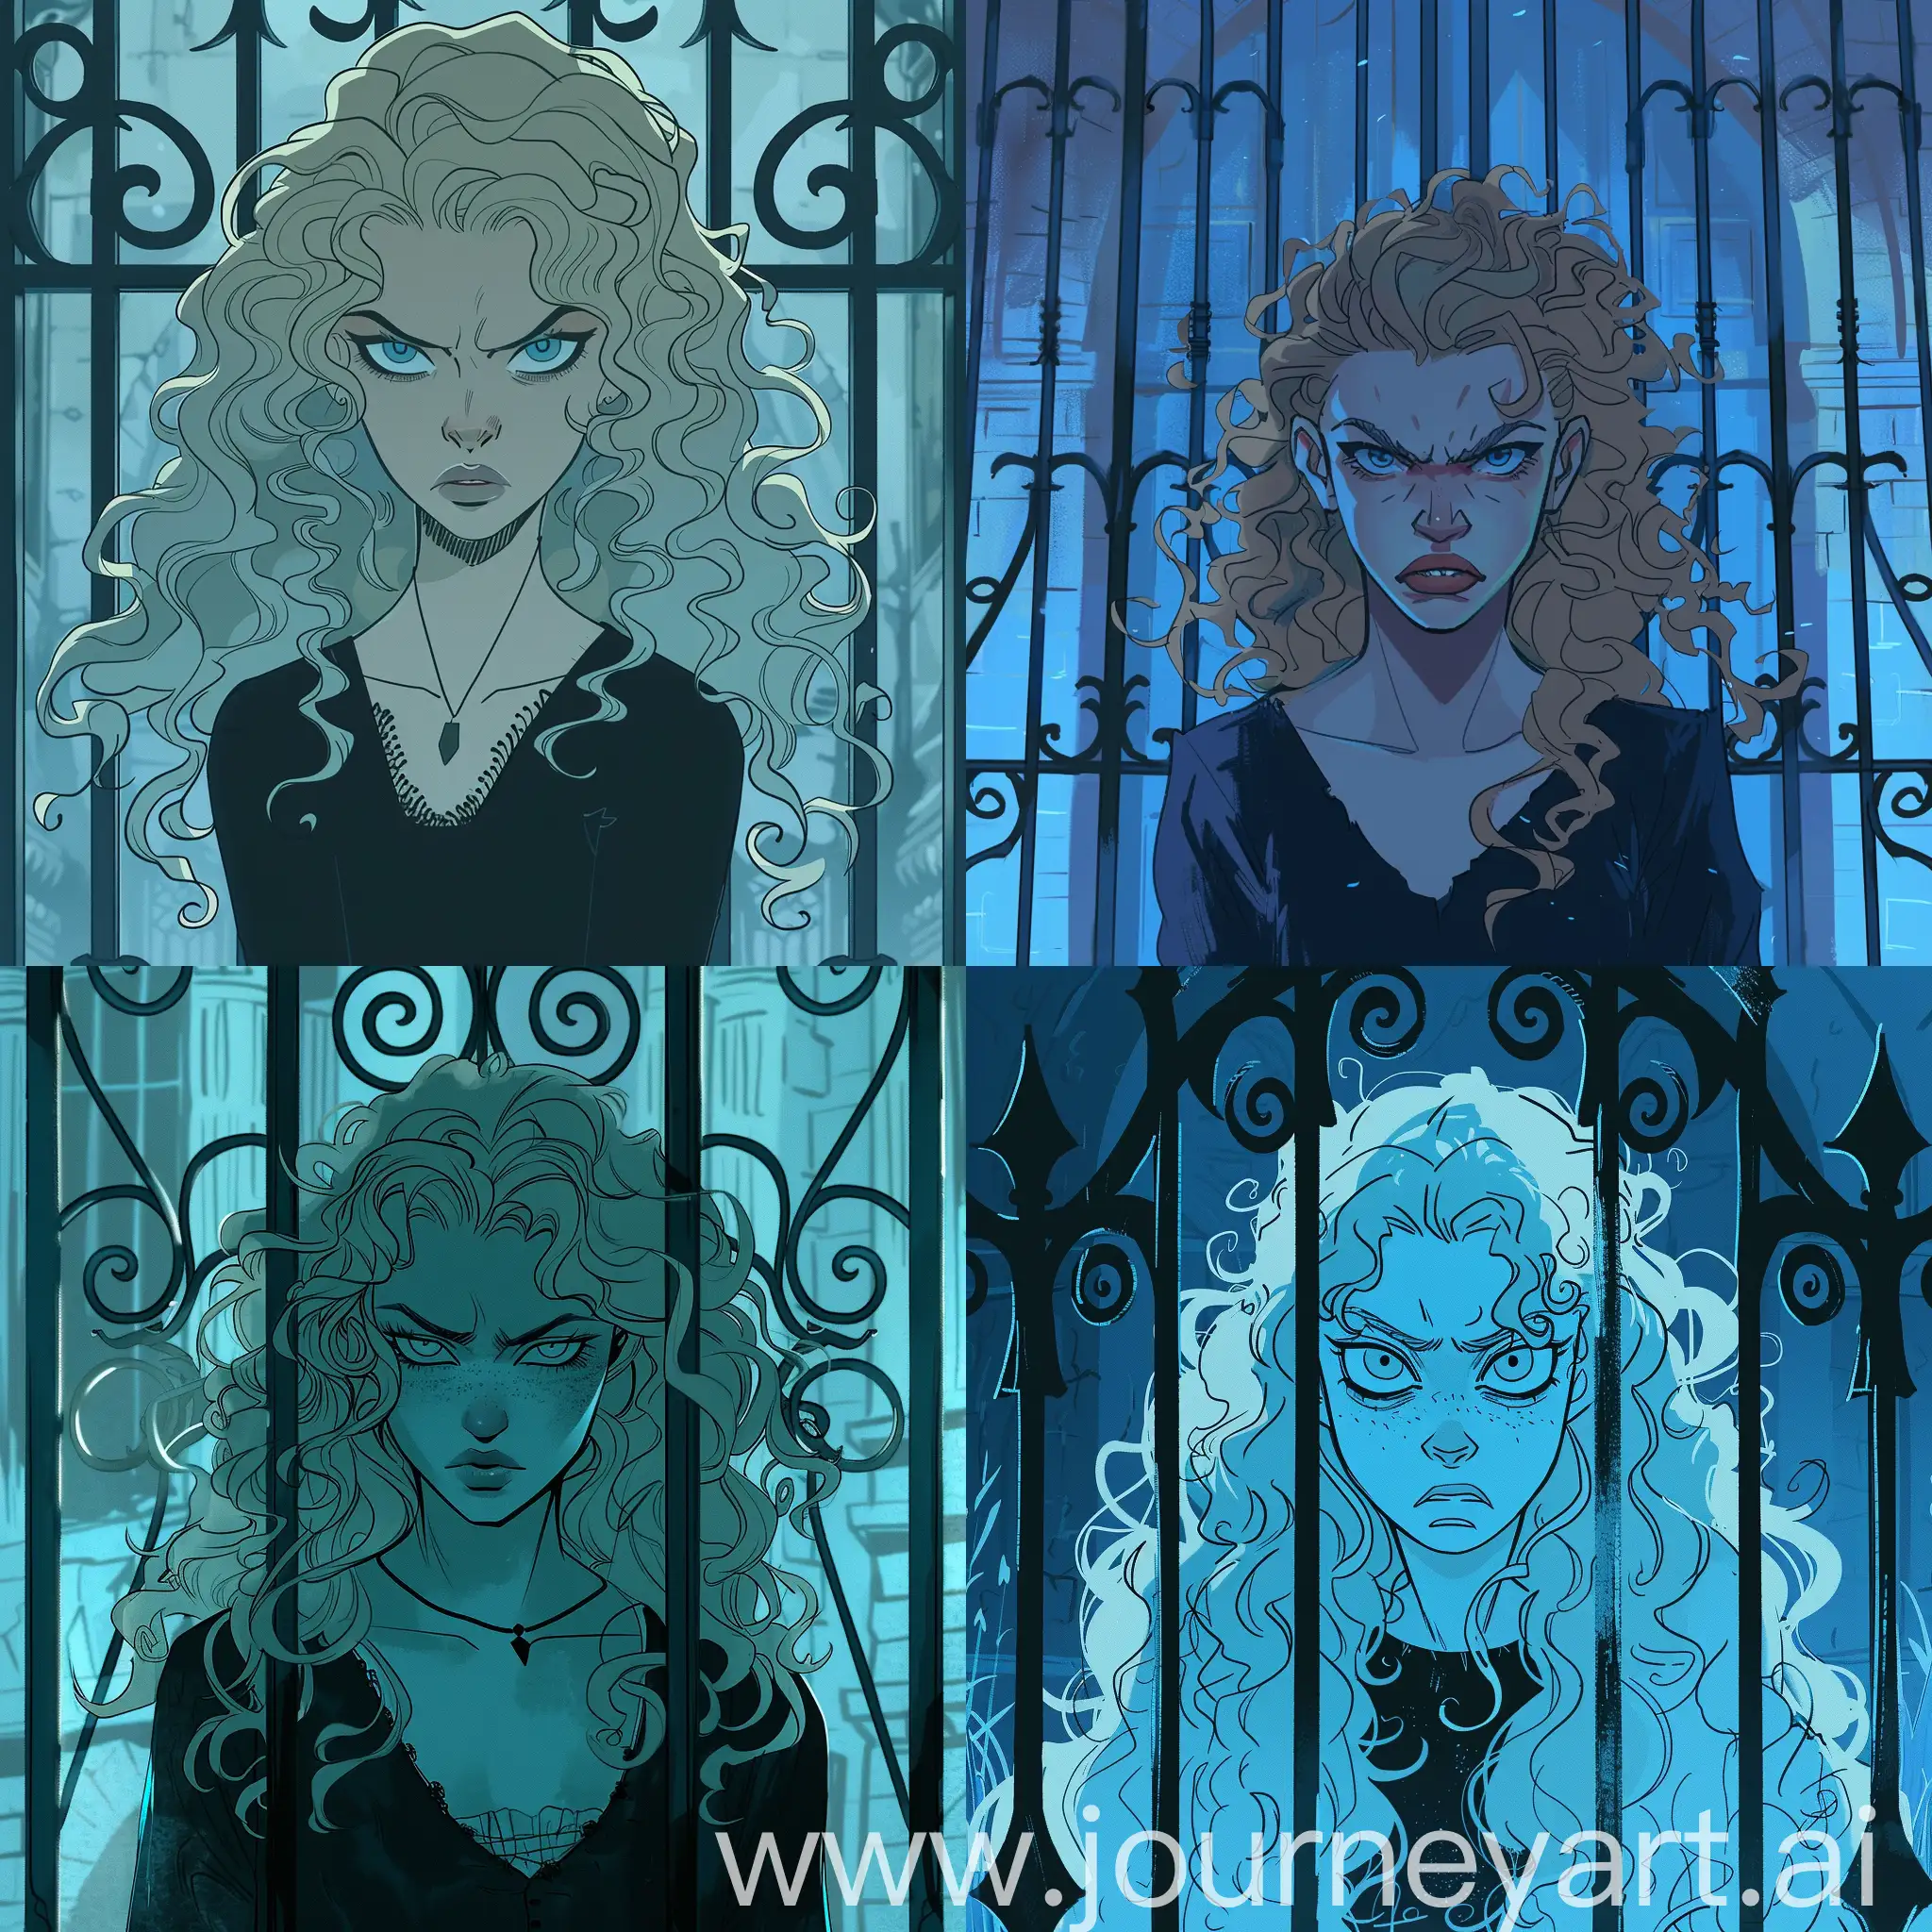 Angry-BlueEyed-Woman-at-High-Gates